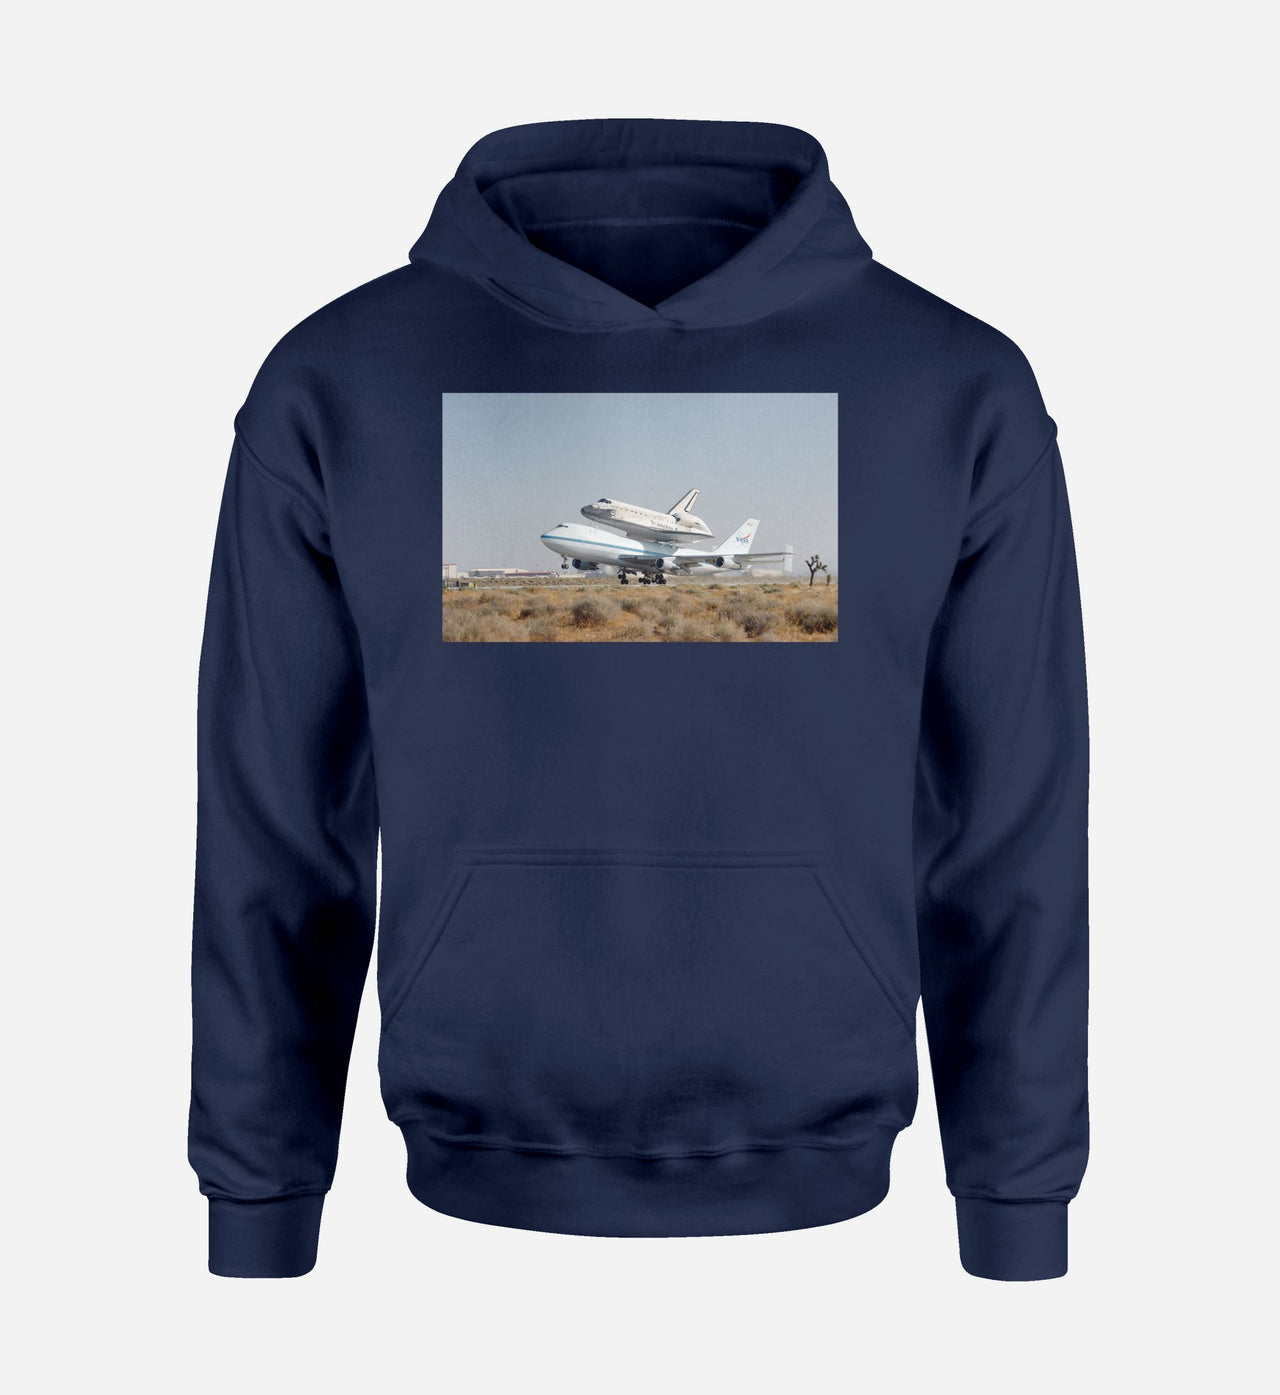 Boeing 747 Carrying Nasa's Space Shuttle Designed Hoodies